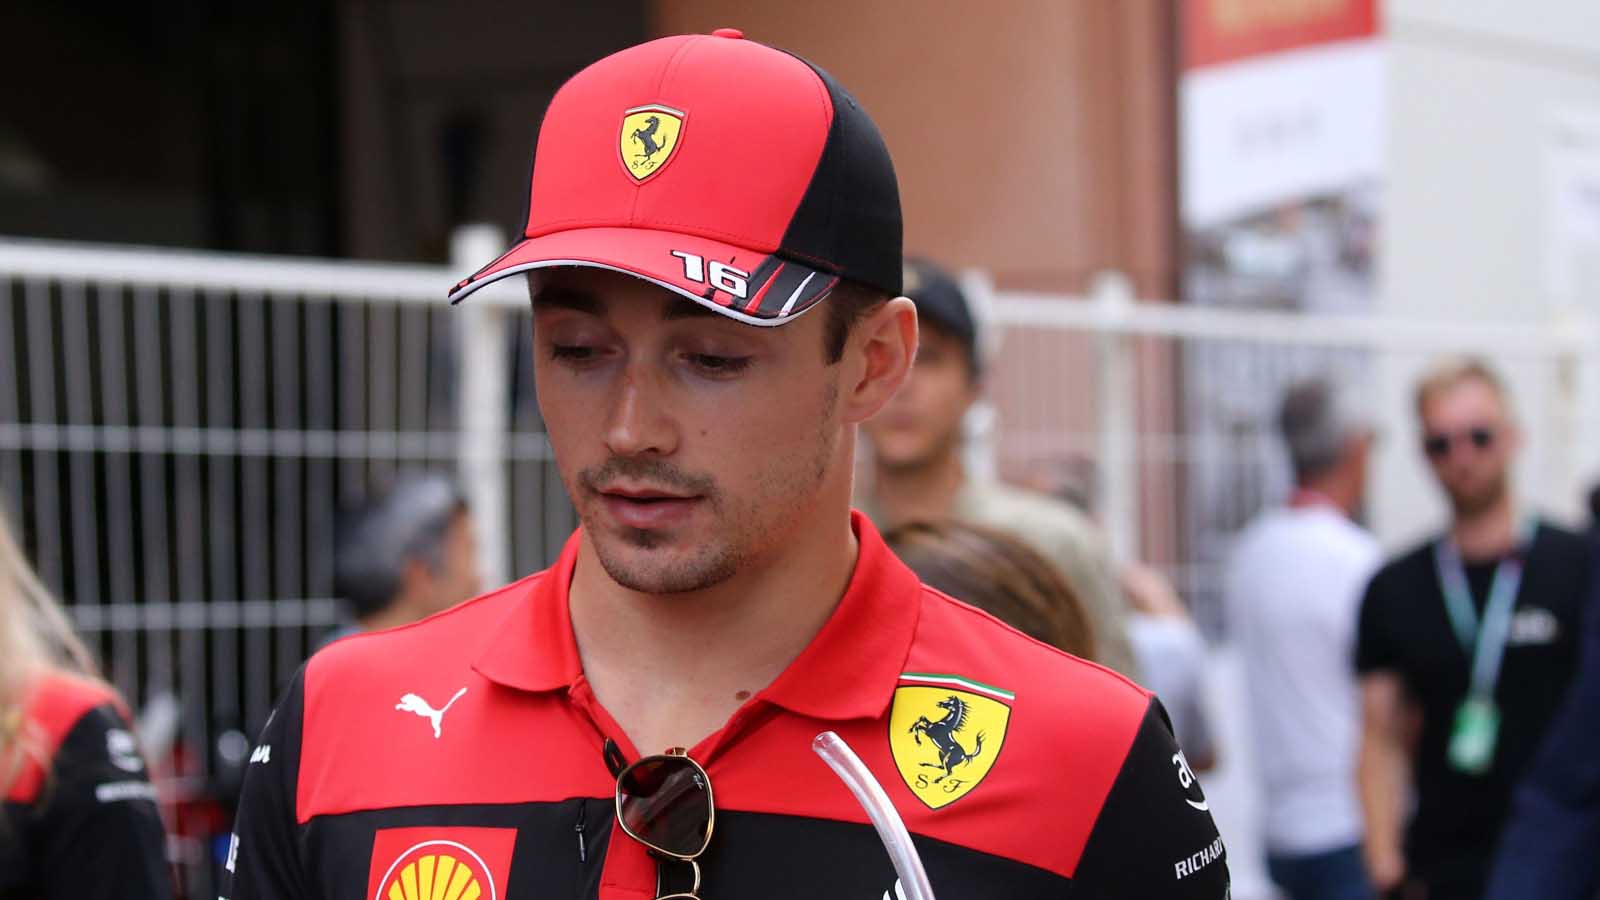 Charles Leclerc with his head down. Monaco May 2022.